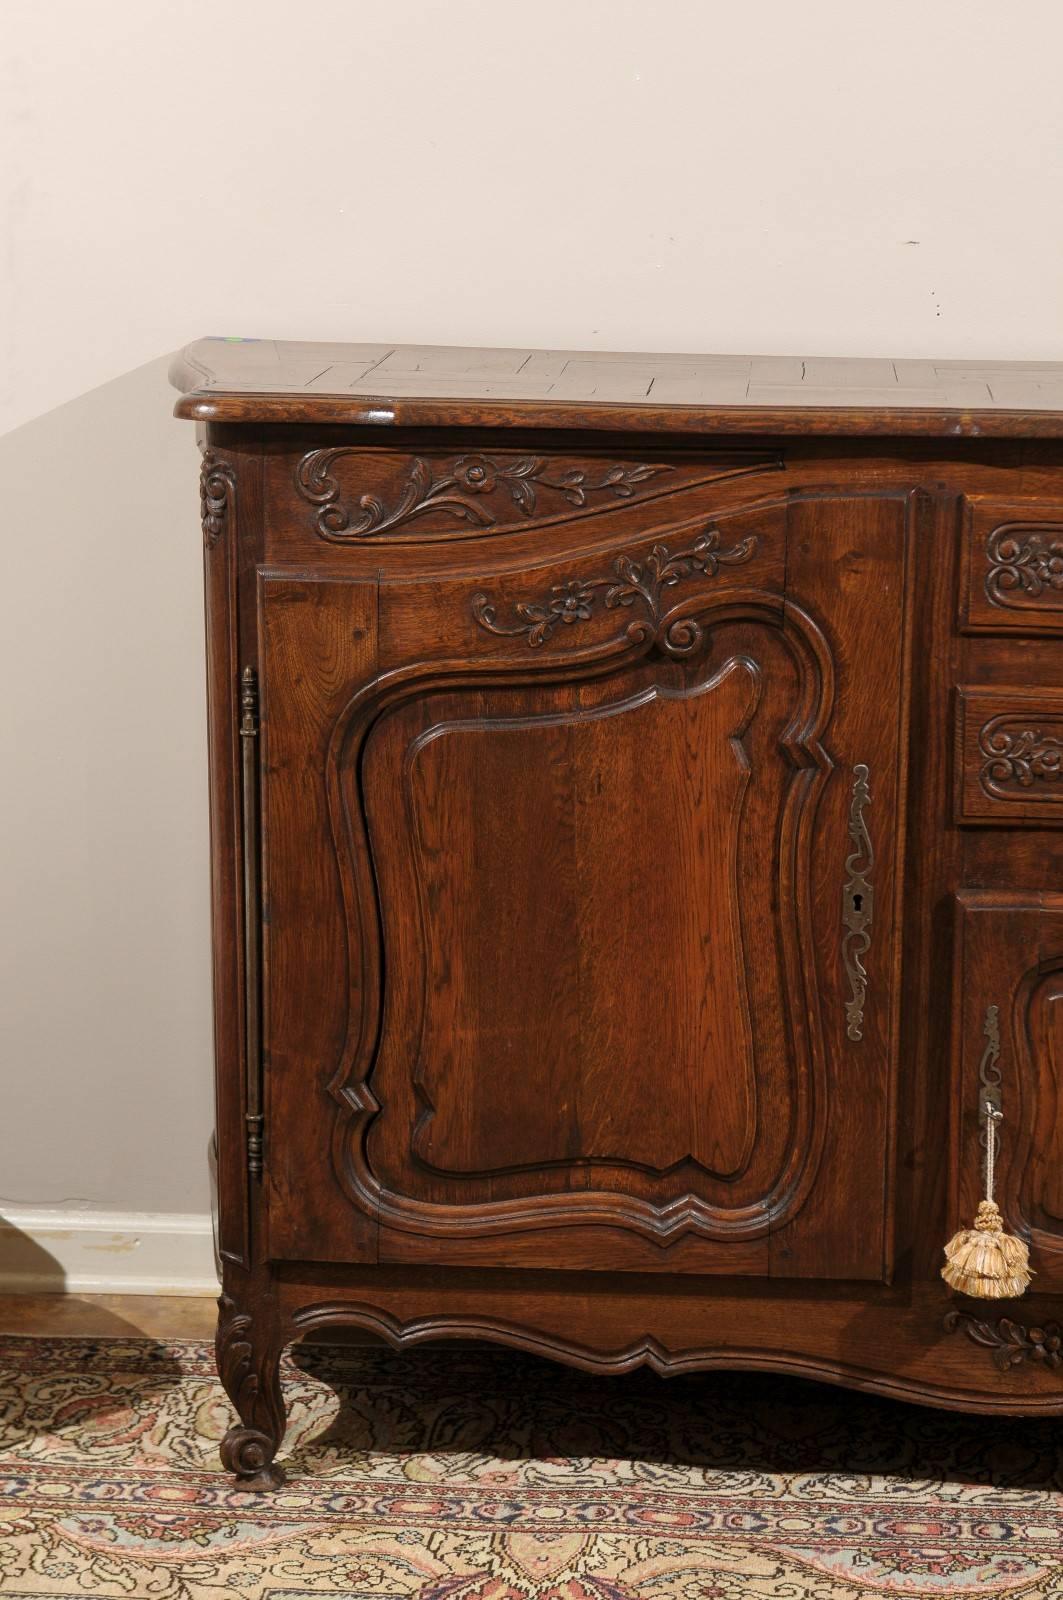 A lovely enfilade with a parquet design on the top. Two center drawers and a cabinet below. Two side cabinets have interior shelving. Carving on doors and drawers with original locks and pulls.